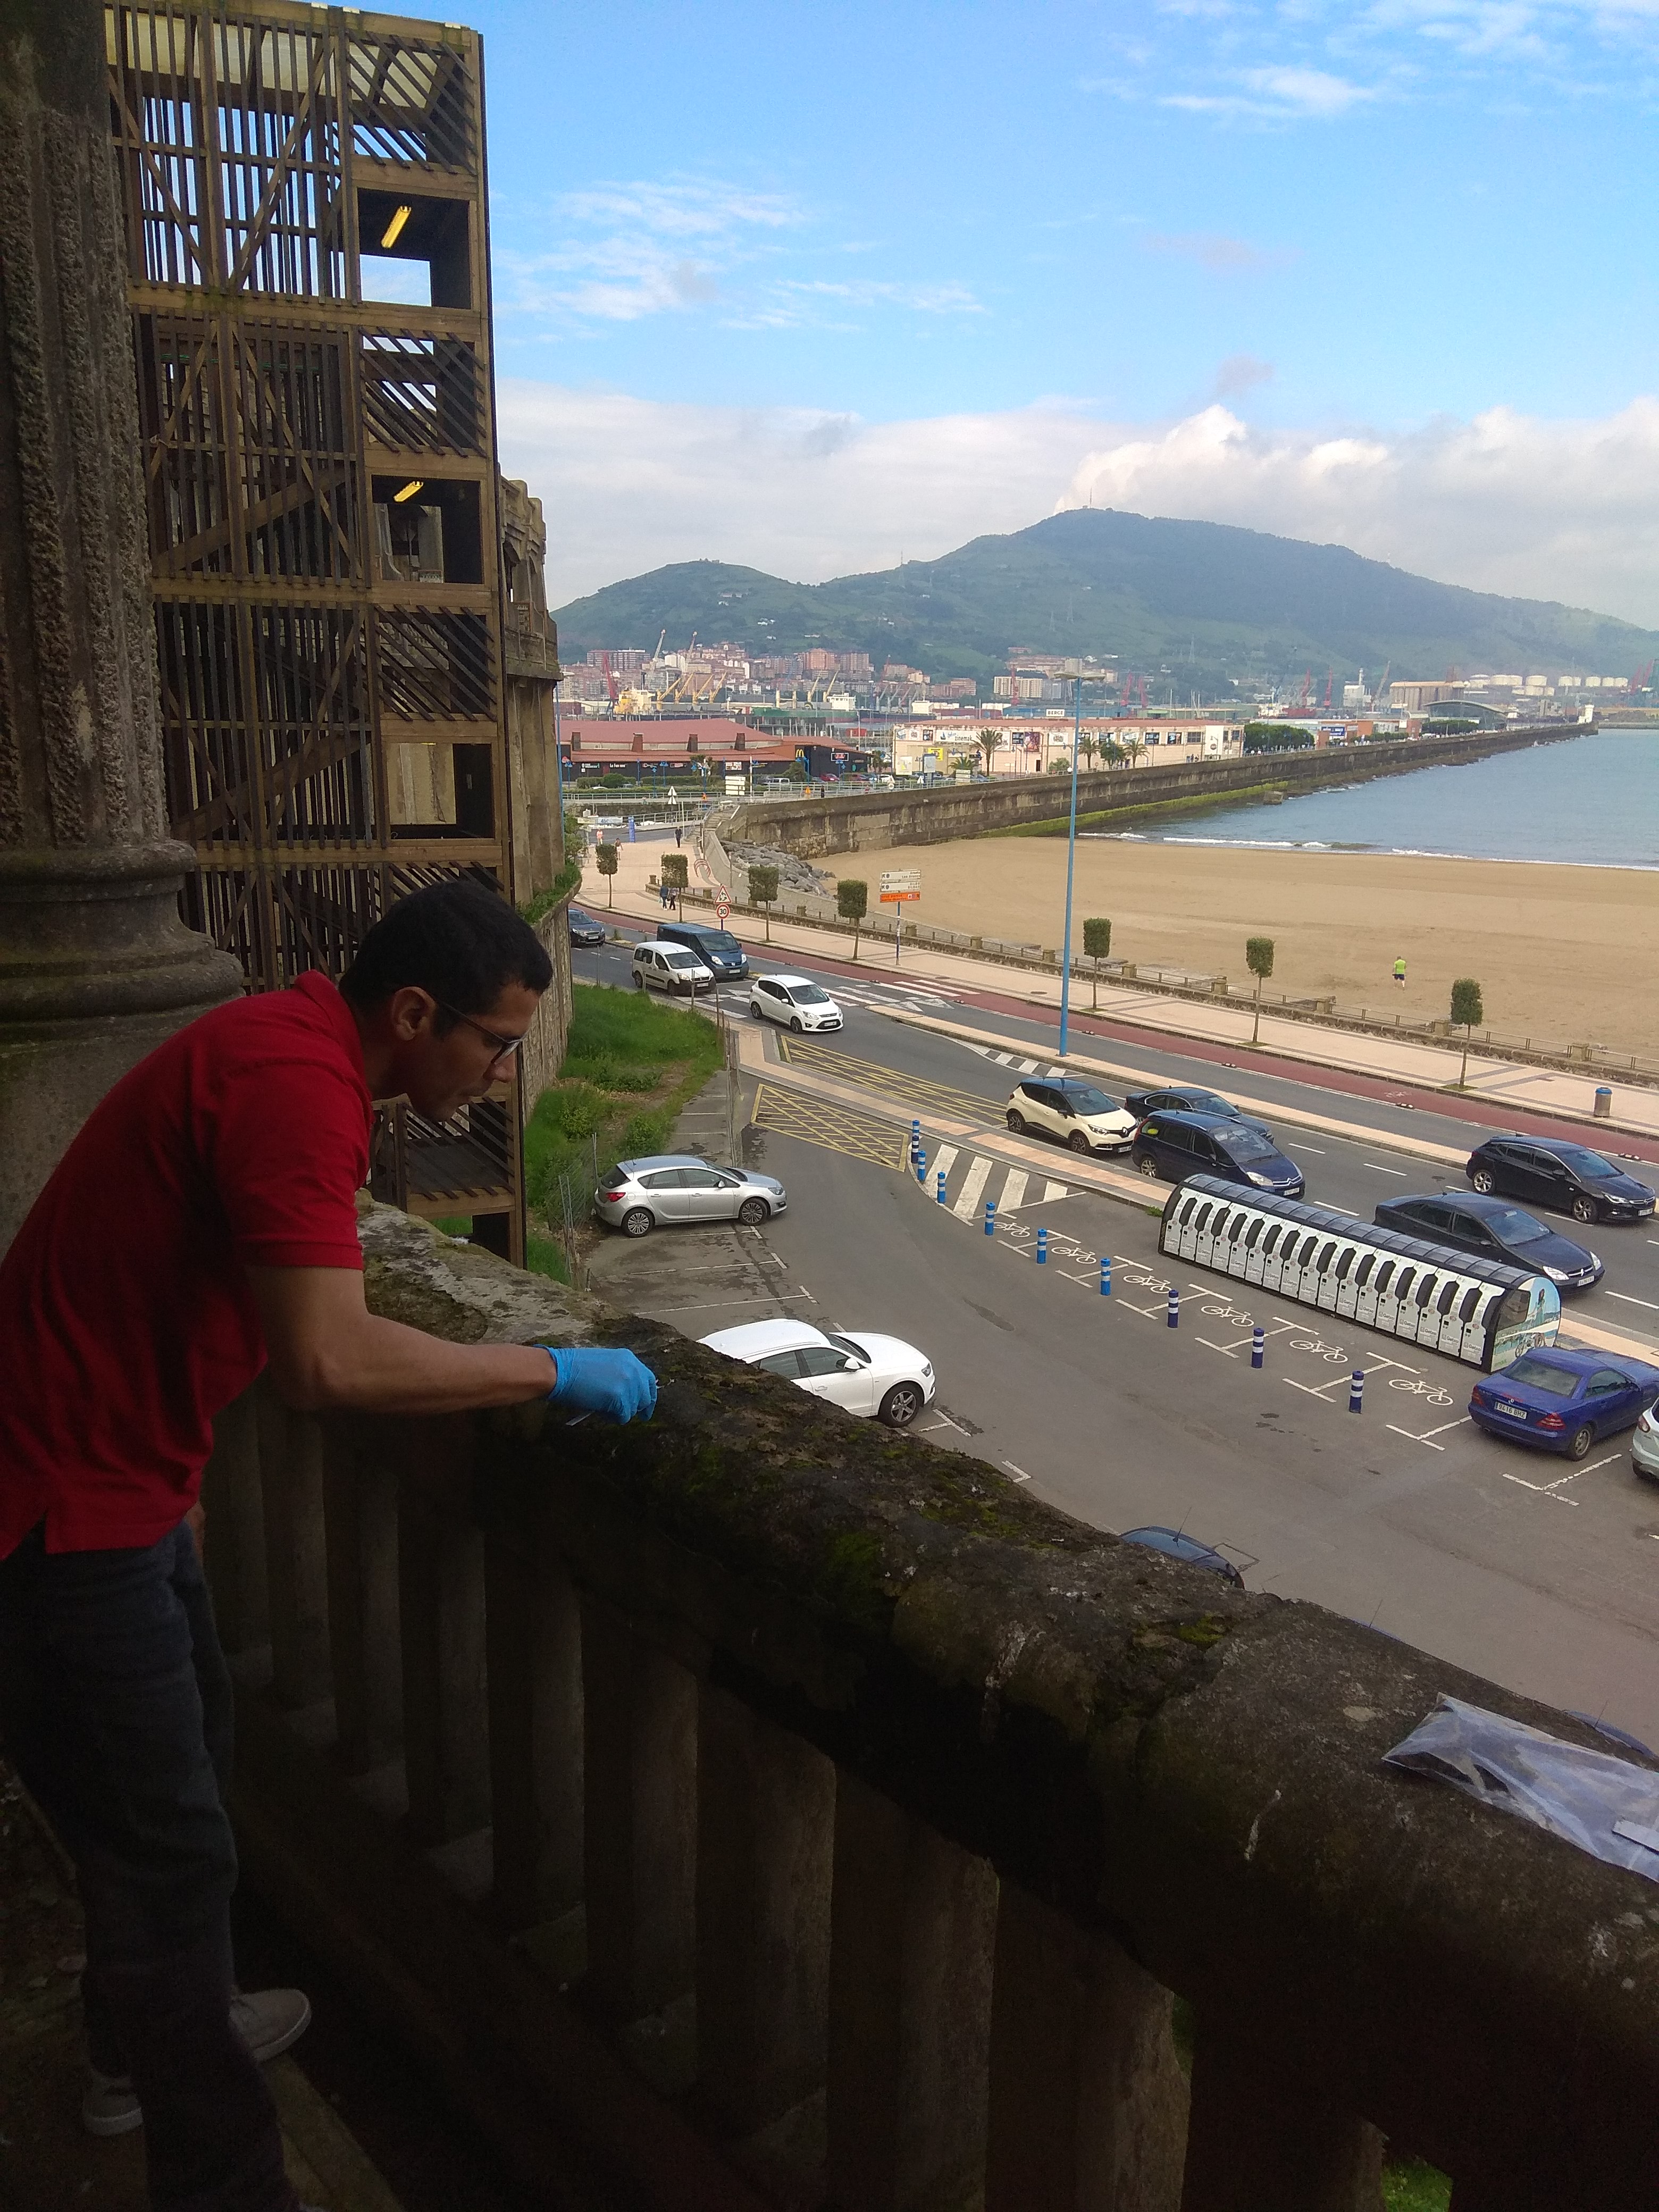 Euler Gallego Cartagena, the lead researcher on the project, taking samples of moss from the grimmiaceae family at Galerías de Punta Begoña (Punto Begoña Galleries), in Getxo